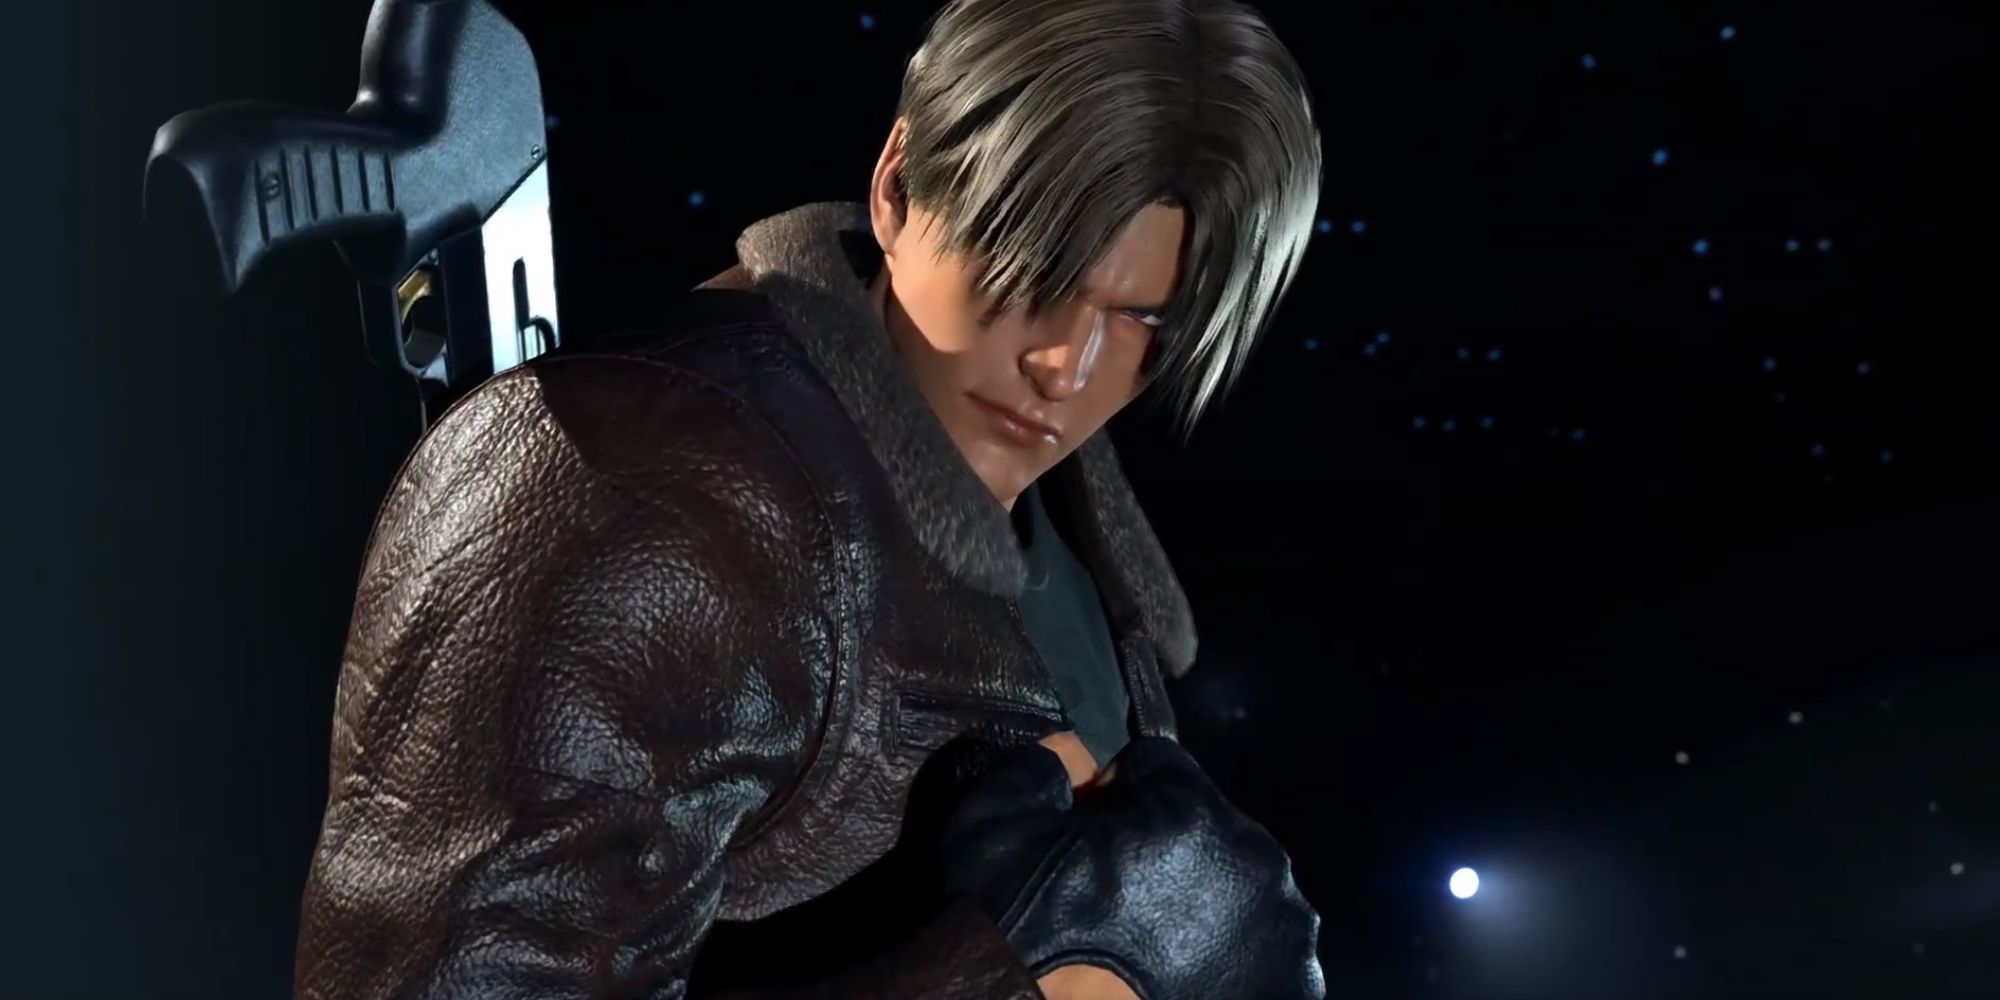 Leon Kennedy from Resident Evil recreated in Tekken 8. He is wearing a brown leather jacket, black fingerless gloves, and has a gun on his back